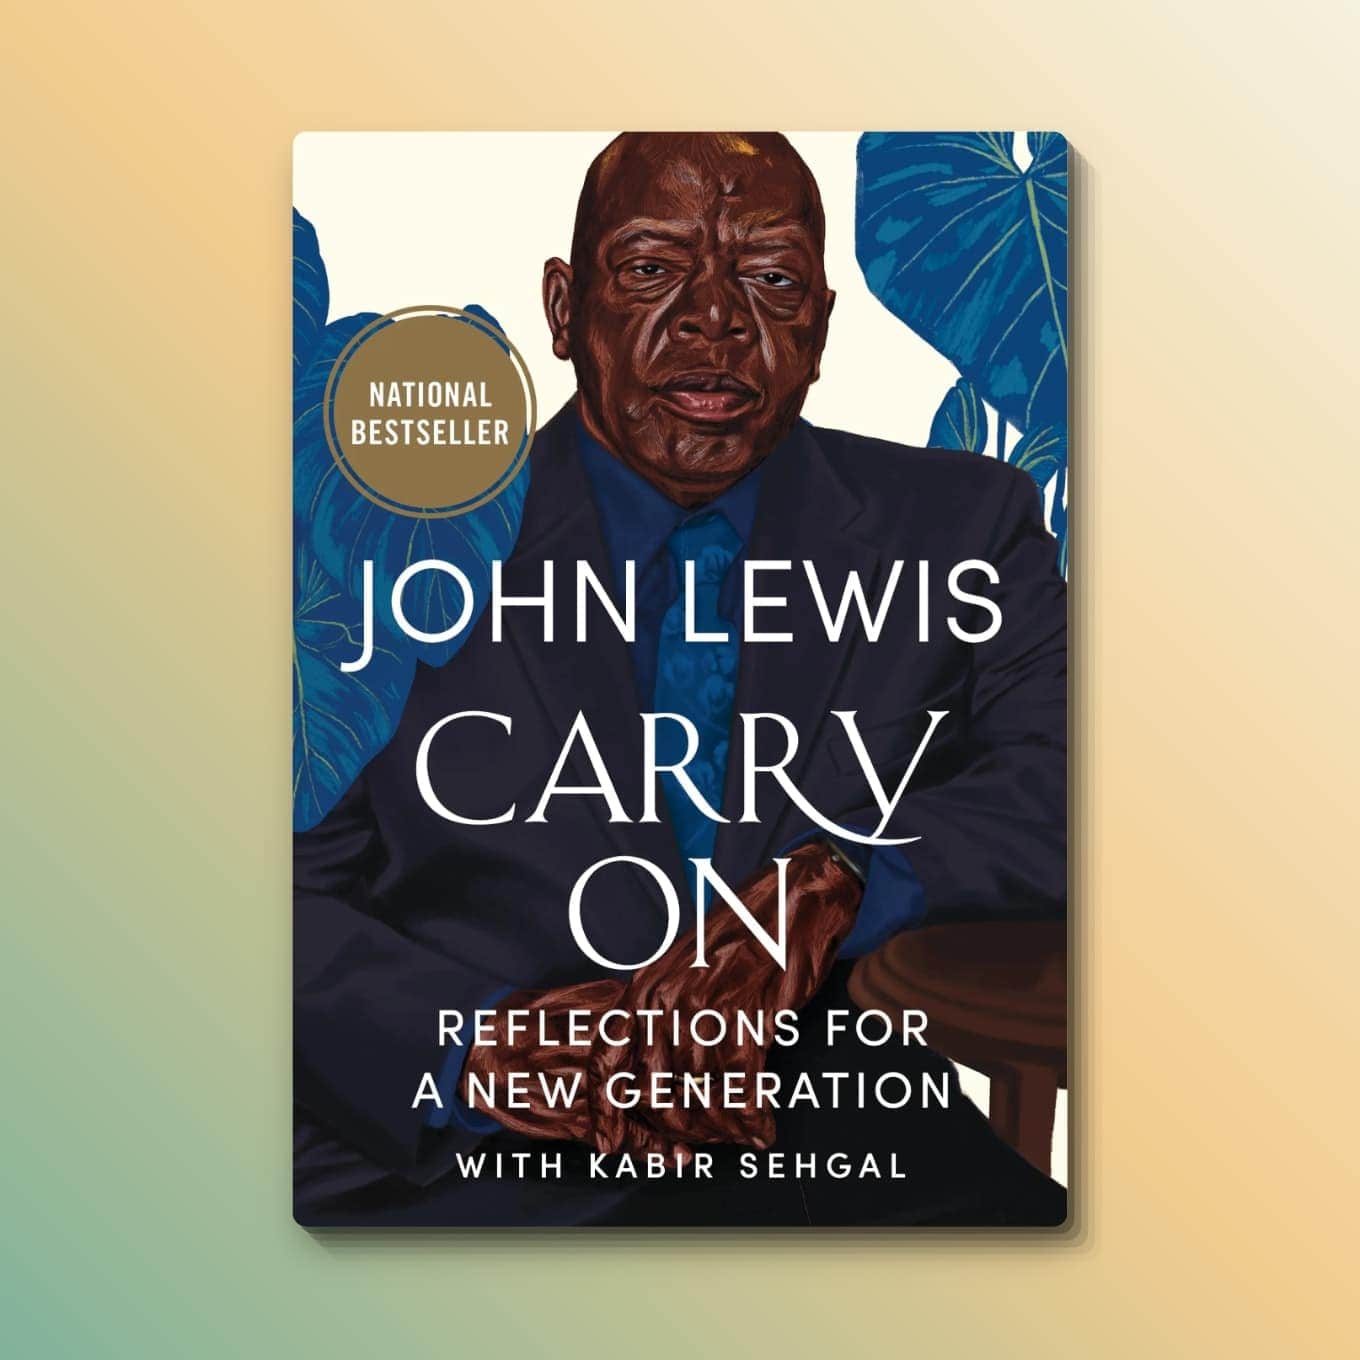 “Carry On: Reflections for a New Generation” by John Lewis